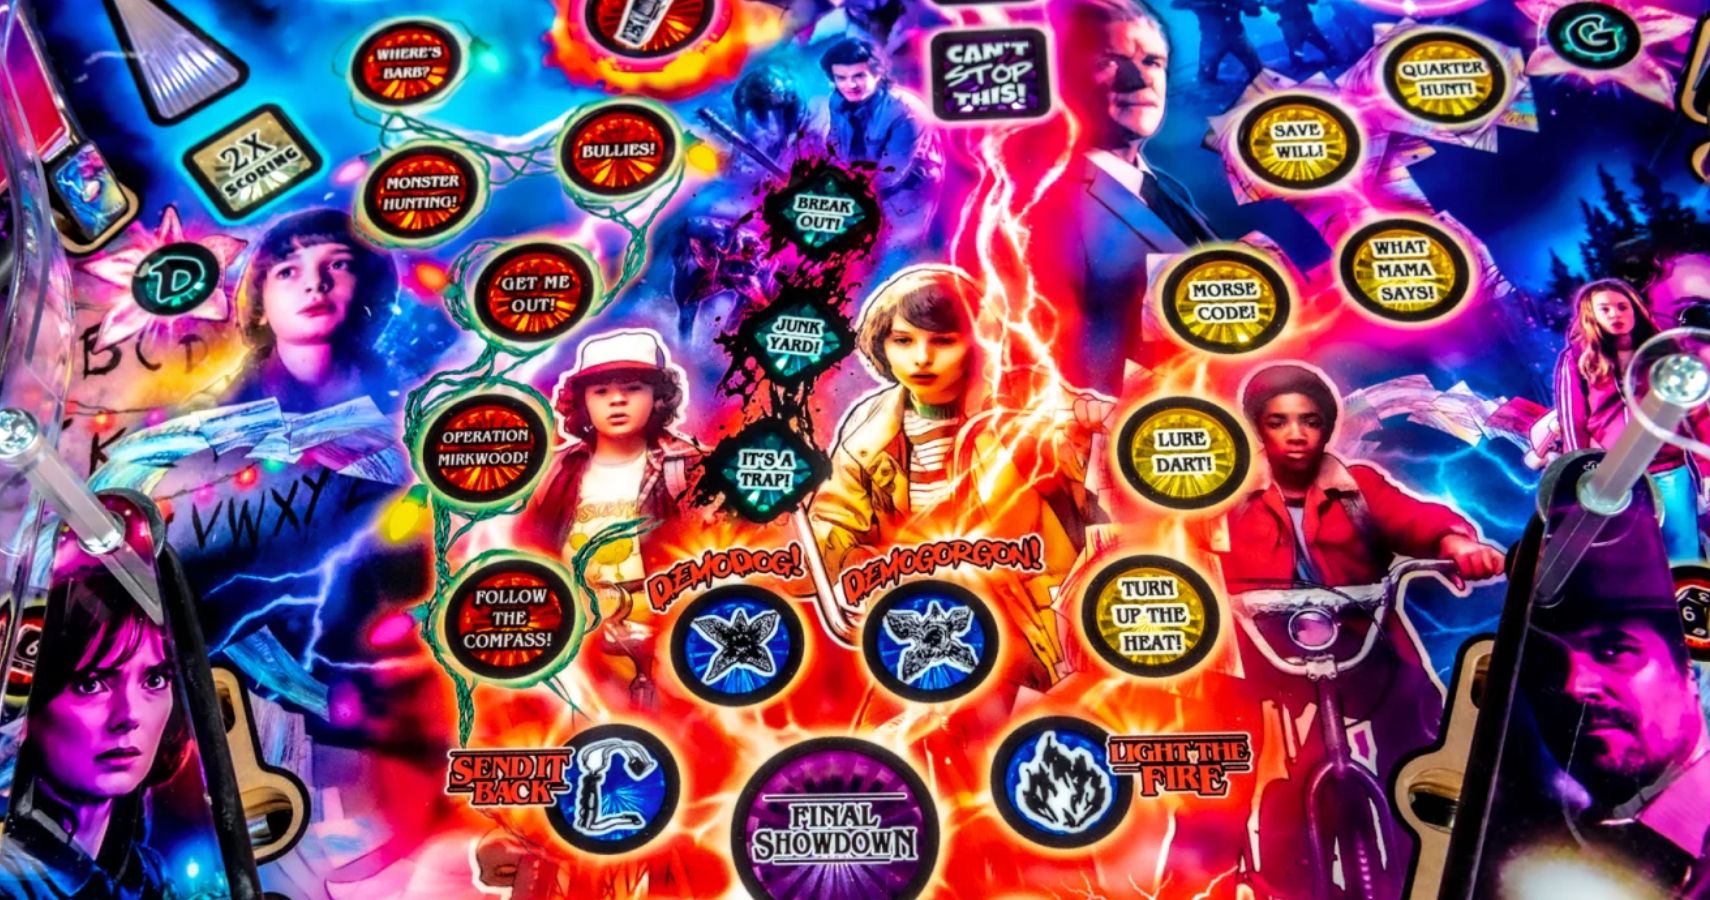 New Stranger Things Pinball Machine Is Out Of This World